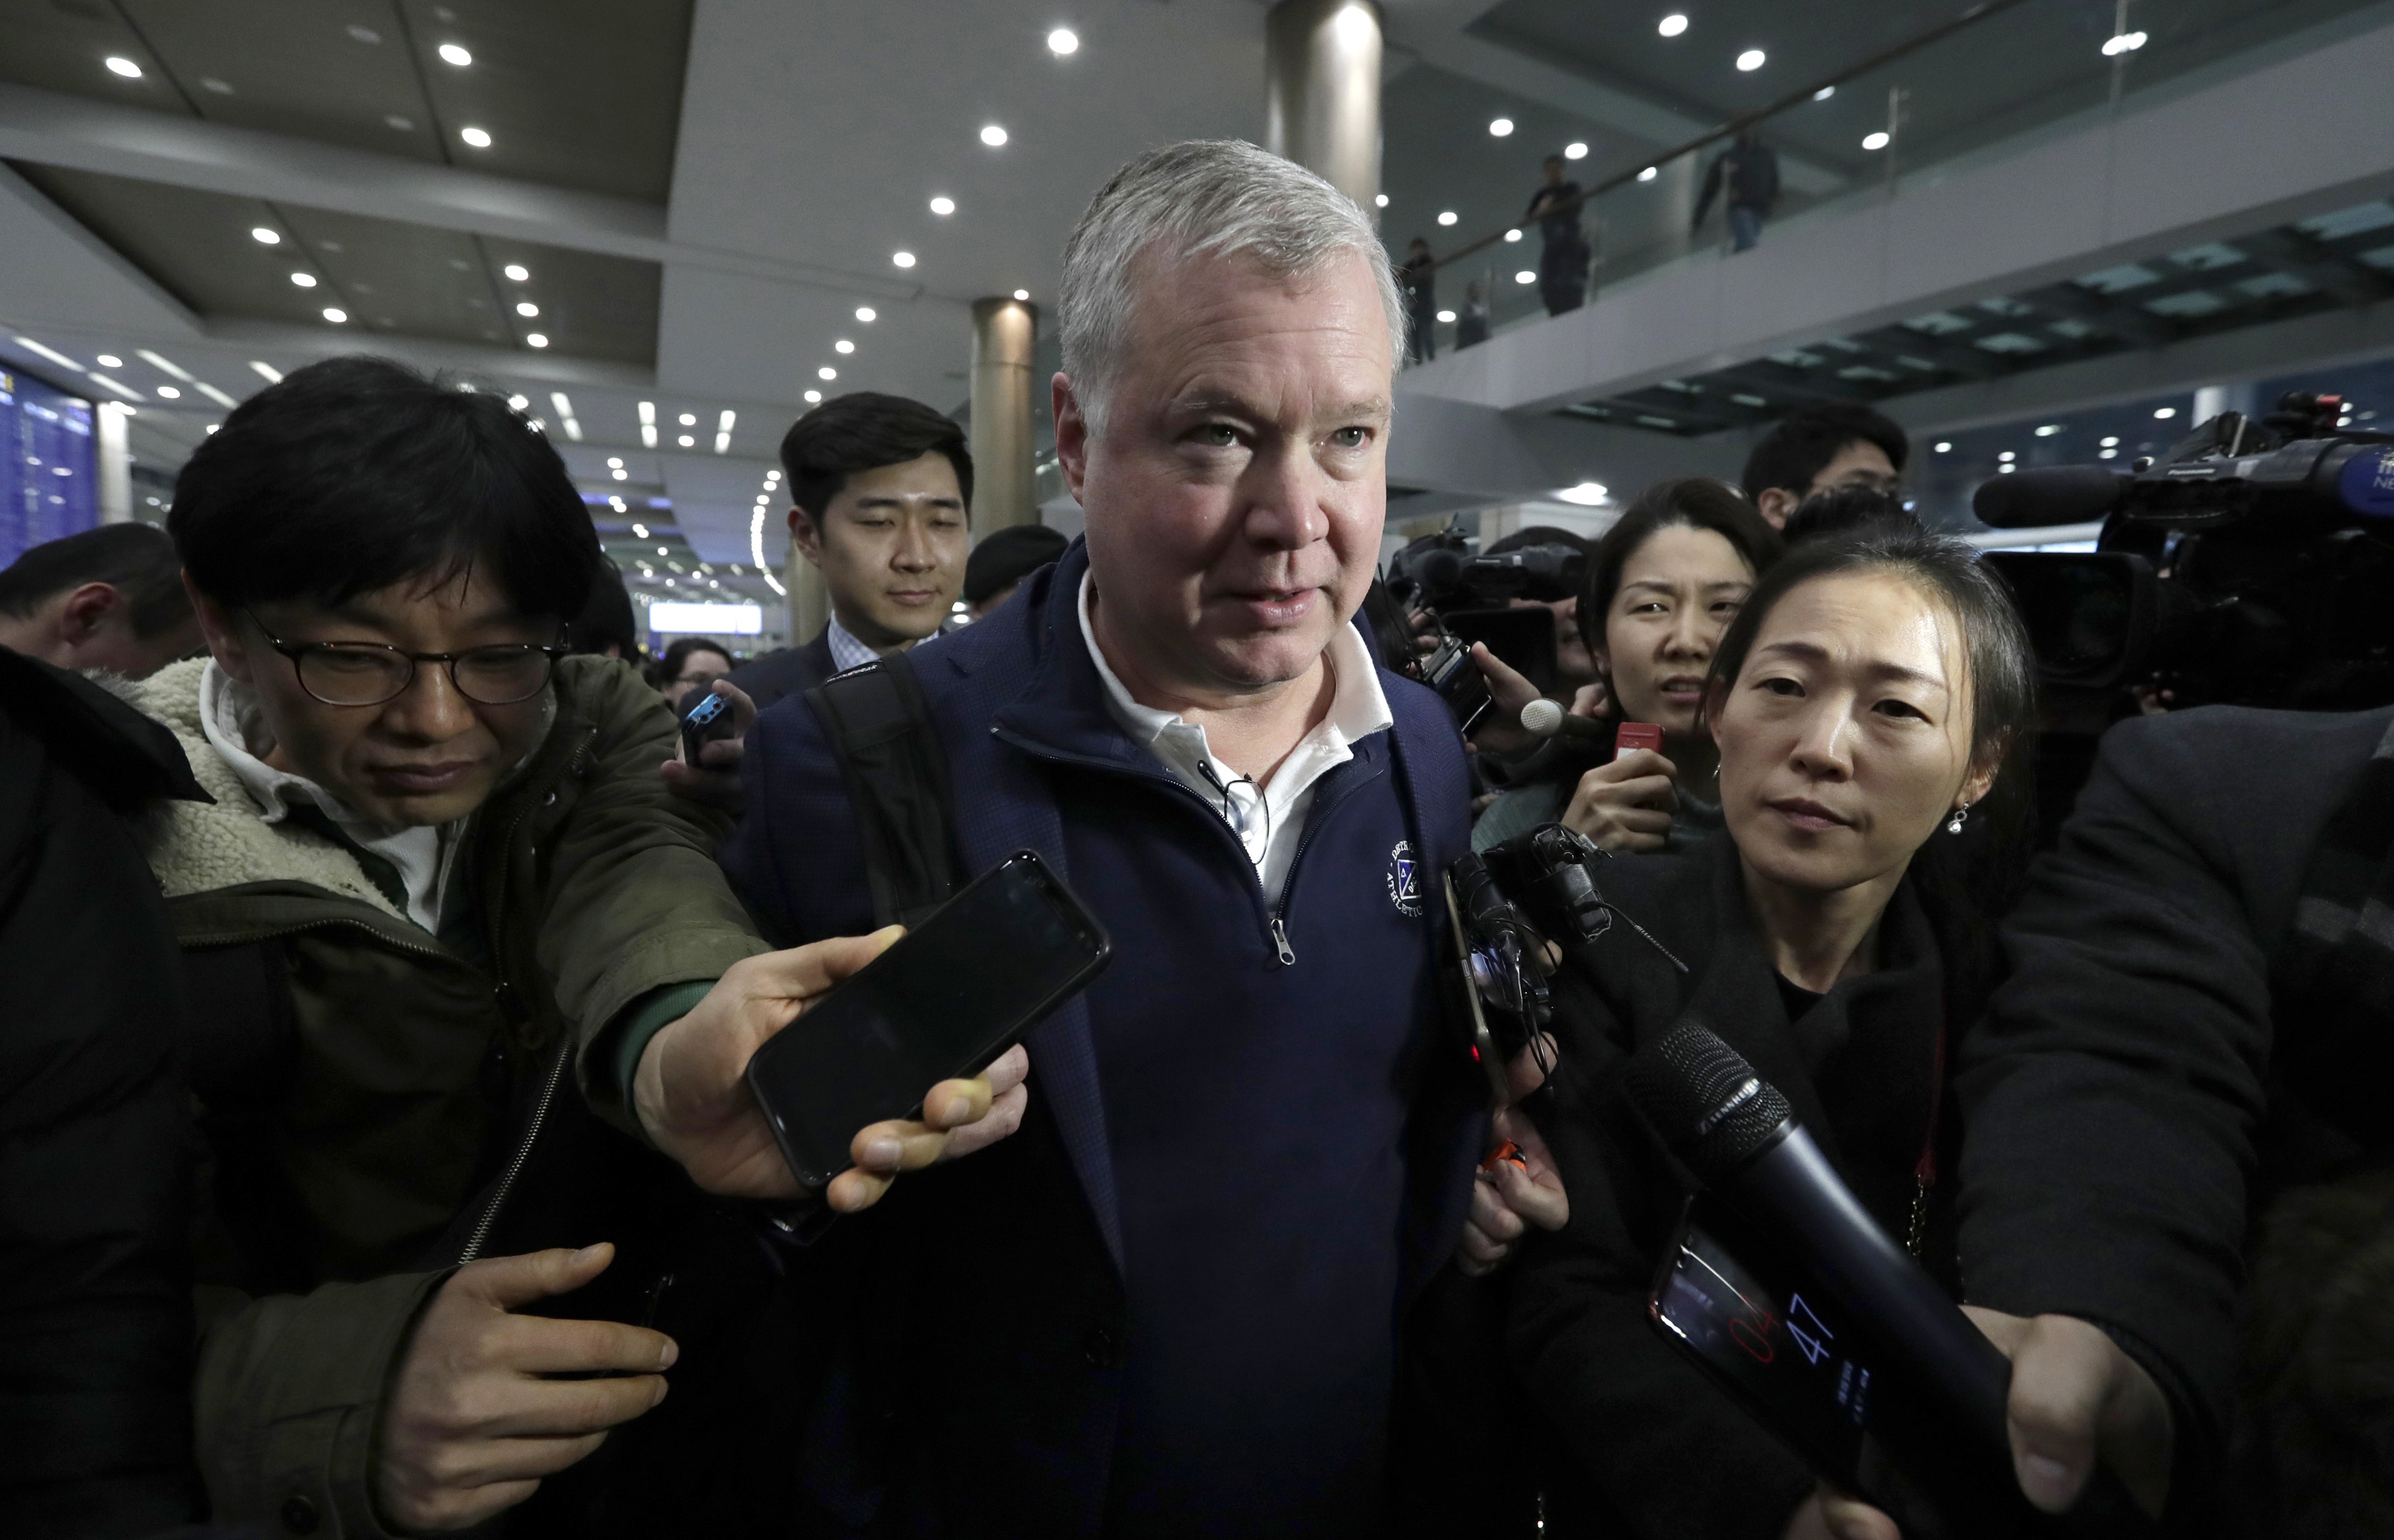 US Special Representative for North Korea Stephen Biegun is questioned by reporters upon his arrival at Incheon International Airport in South Korea in February. Photo: AP